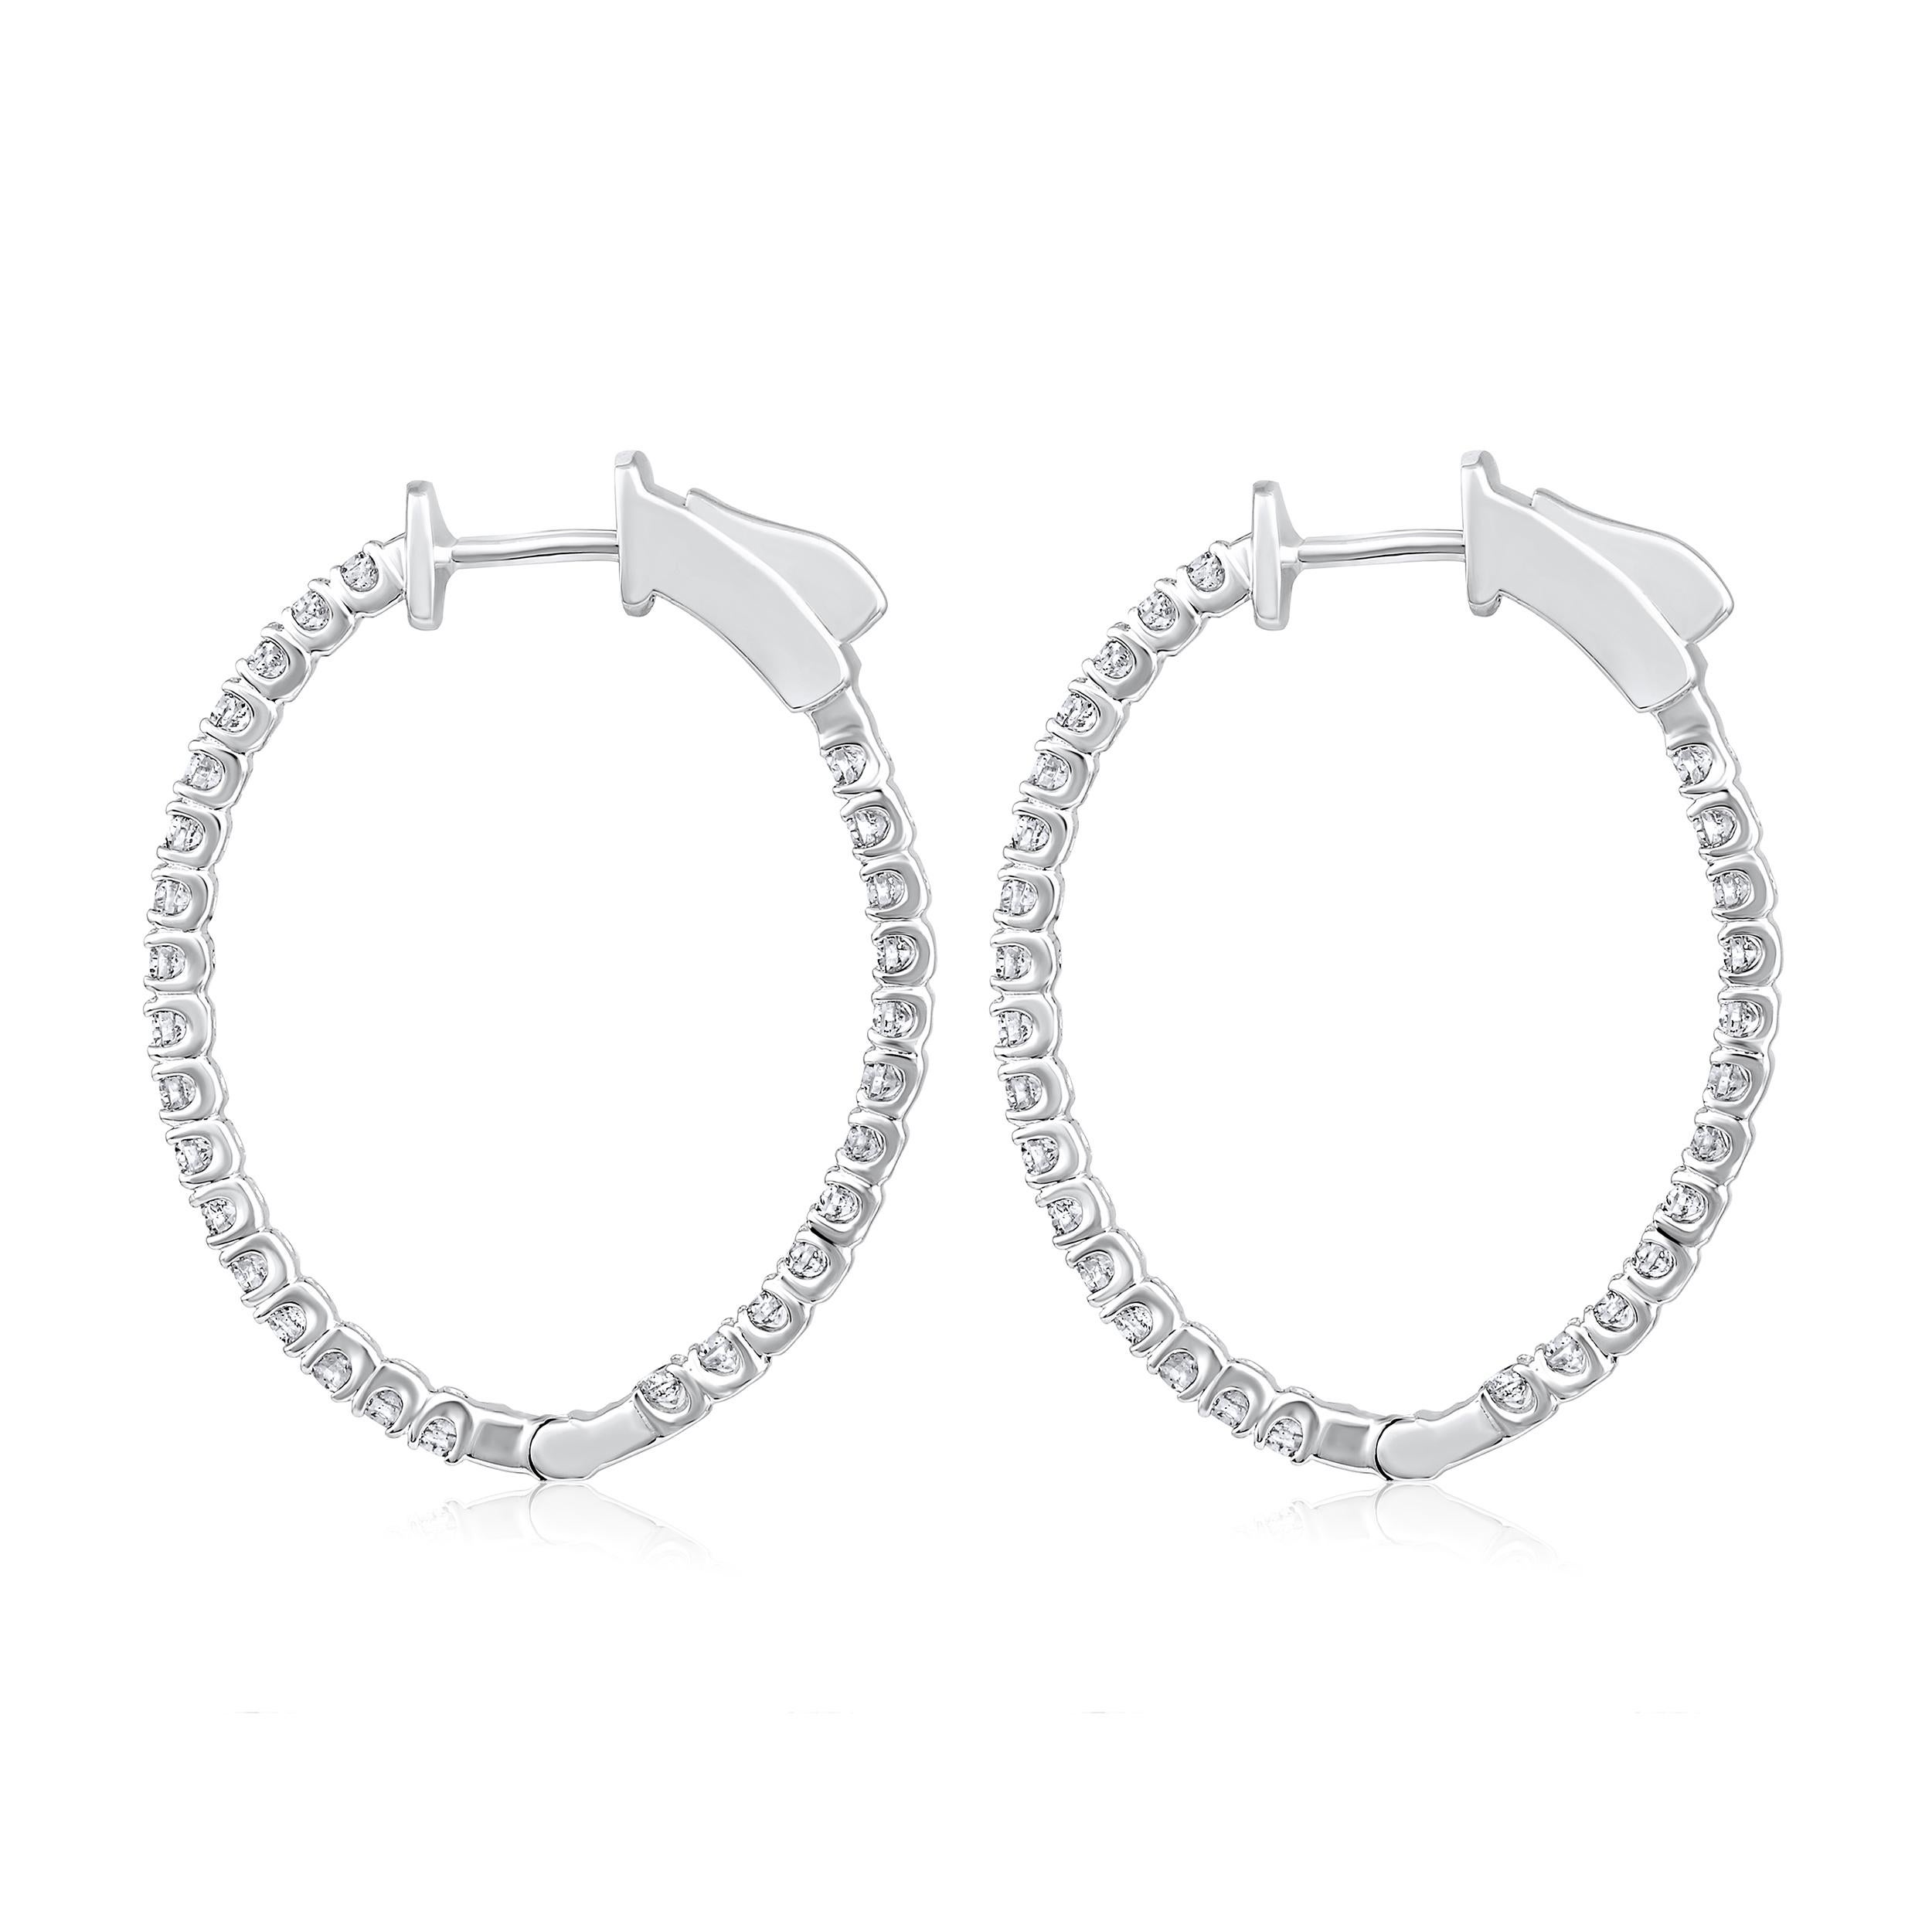 Brilliant Cut Certified 14k Gold 1 Carat Natural Diamond Oval Inside Out Hoop White Earrings For Sale